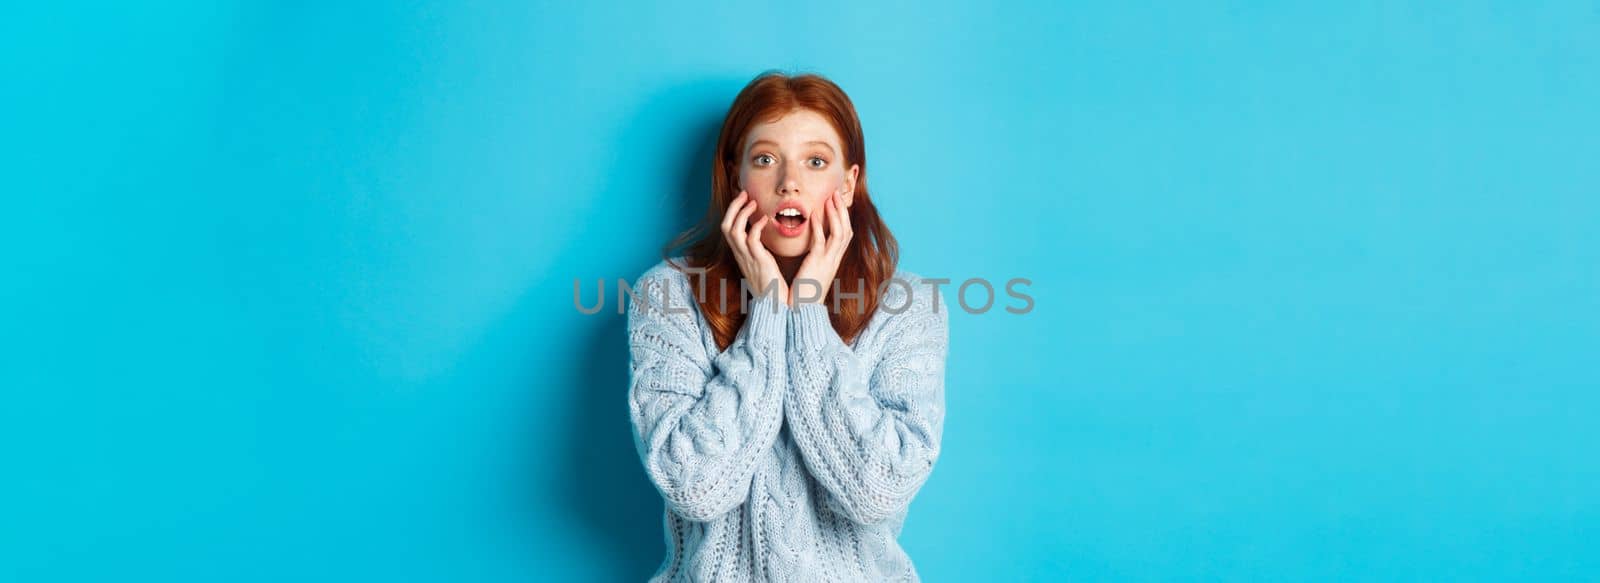 Startled redhead girl staring at something amazing, gasping in awe, standing in sweater against blue background. Copy space